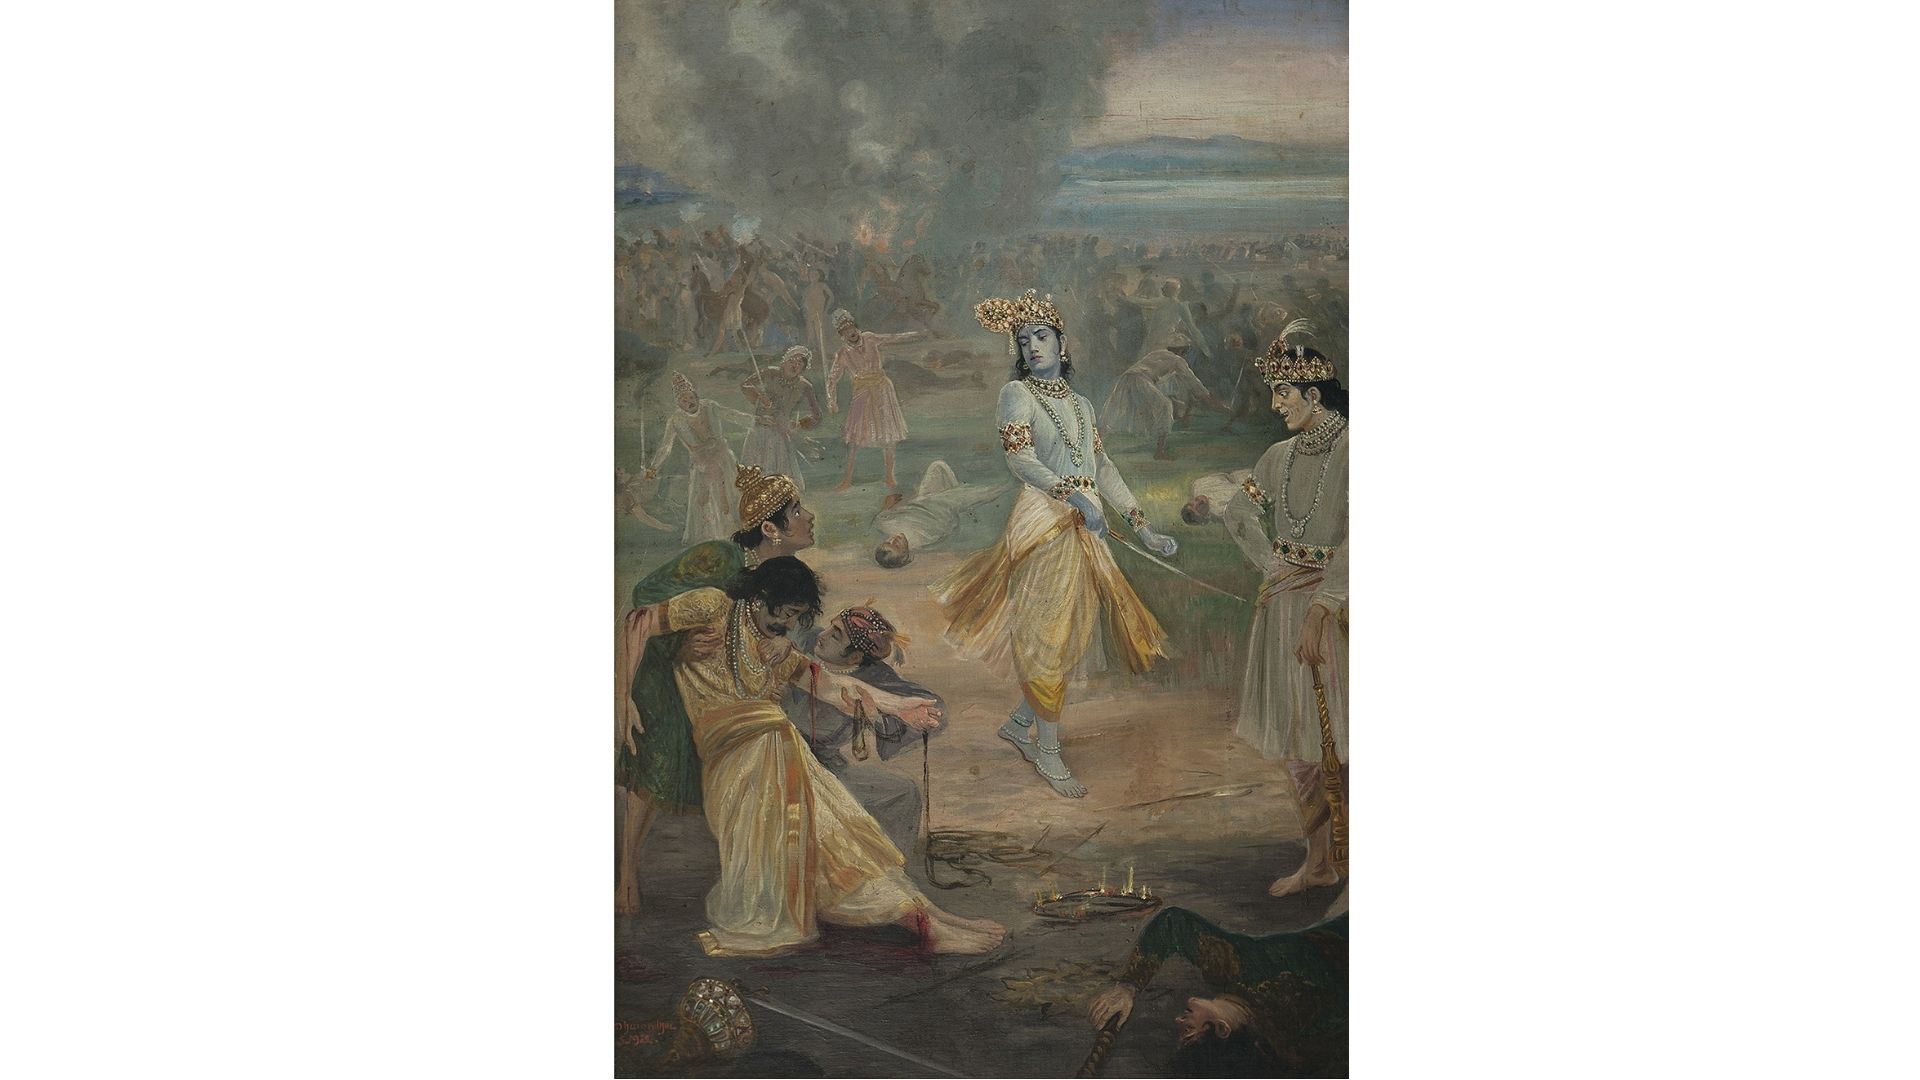 Battle scene with Lord Krishna at the forefront